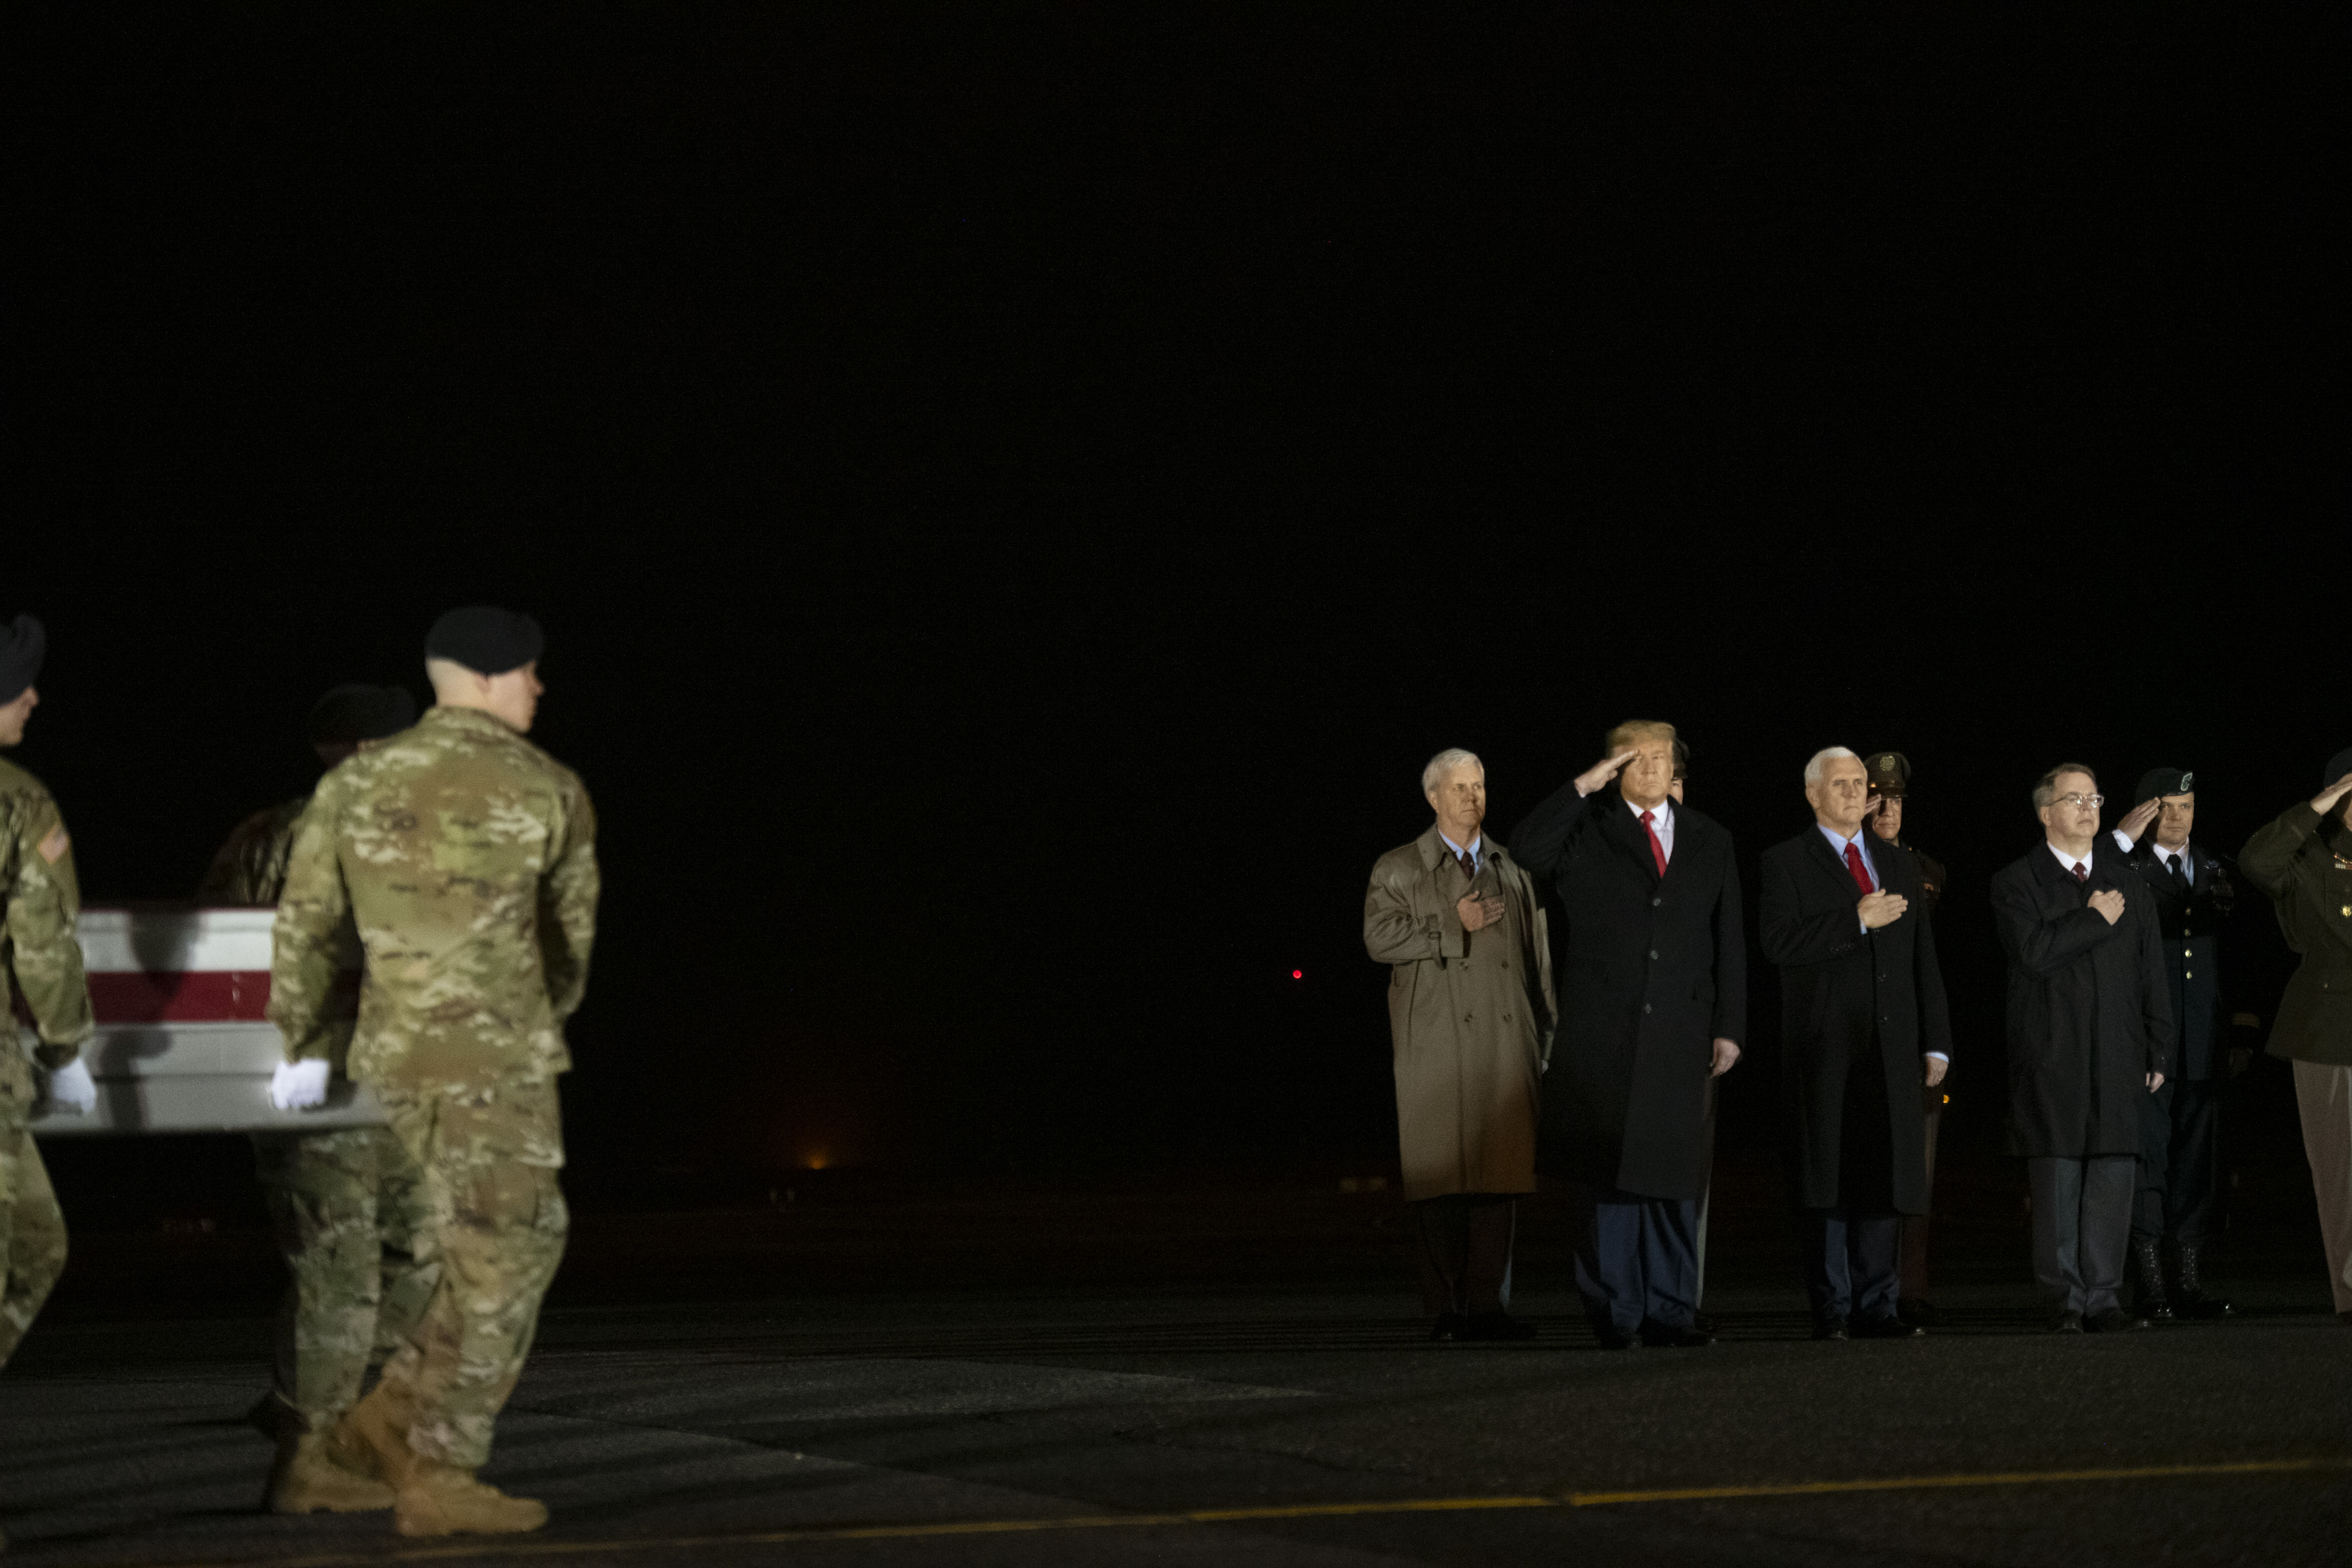 DOVER, DE - FEBRUARY 10: (L-R) U.S. President Donald J. Trump and Vice President Mike Pence watch as military personnel carry a transfer case for fallen service member, U.S. Army Sgt. 1st Class Javier J. Gutierrez, 28, during a dignified transfer at Dover Air Force Base on February 10, 2020 in Dover, Delaware. Gutierrez and U.S. Army Sgt. 1st Class Antonio R. Rodriguez were both killed in an attack in the Nangarhar province of Afghanistan on Saturday, according to a Department of Defense release. (Photo by Mark Makela/Getty Images)